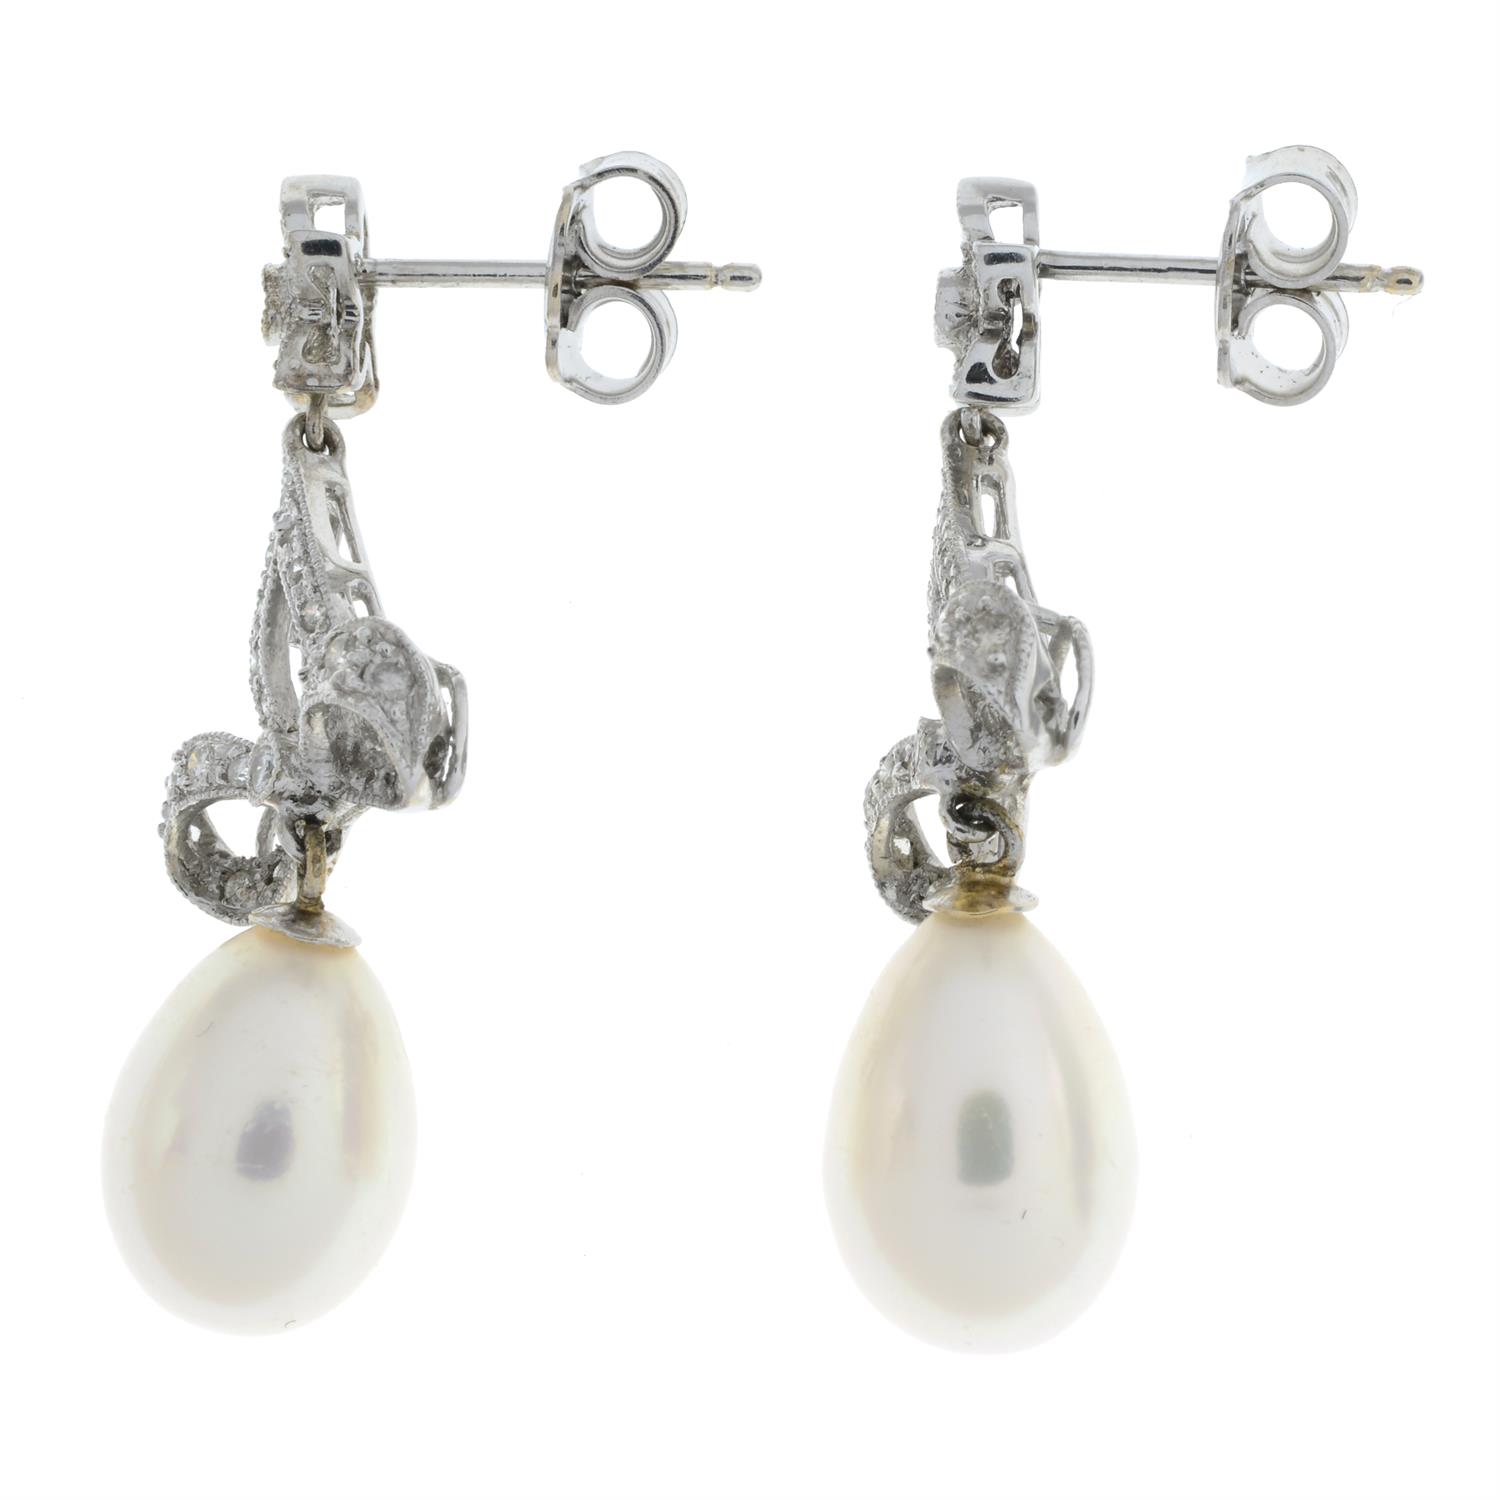 Cultured pearl and diamond earrings - Image 4 of 4